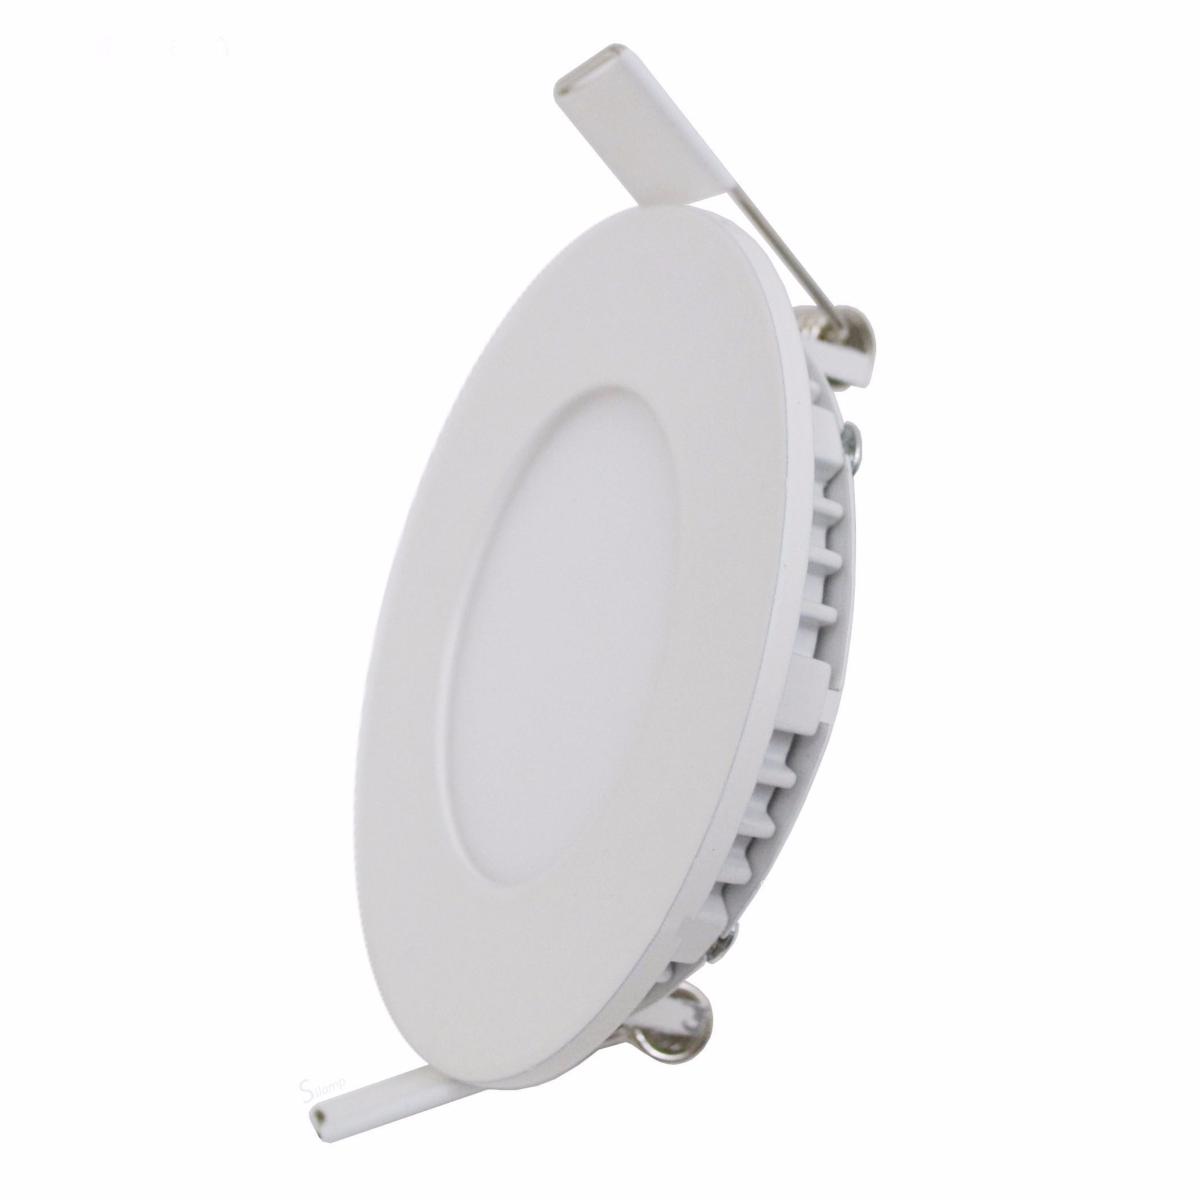 Spot LED Extra Plat Downlight Rond 6W Blanc (Pack de 5) - Silamp France